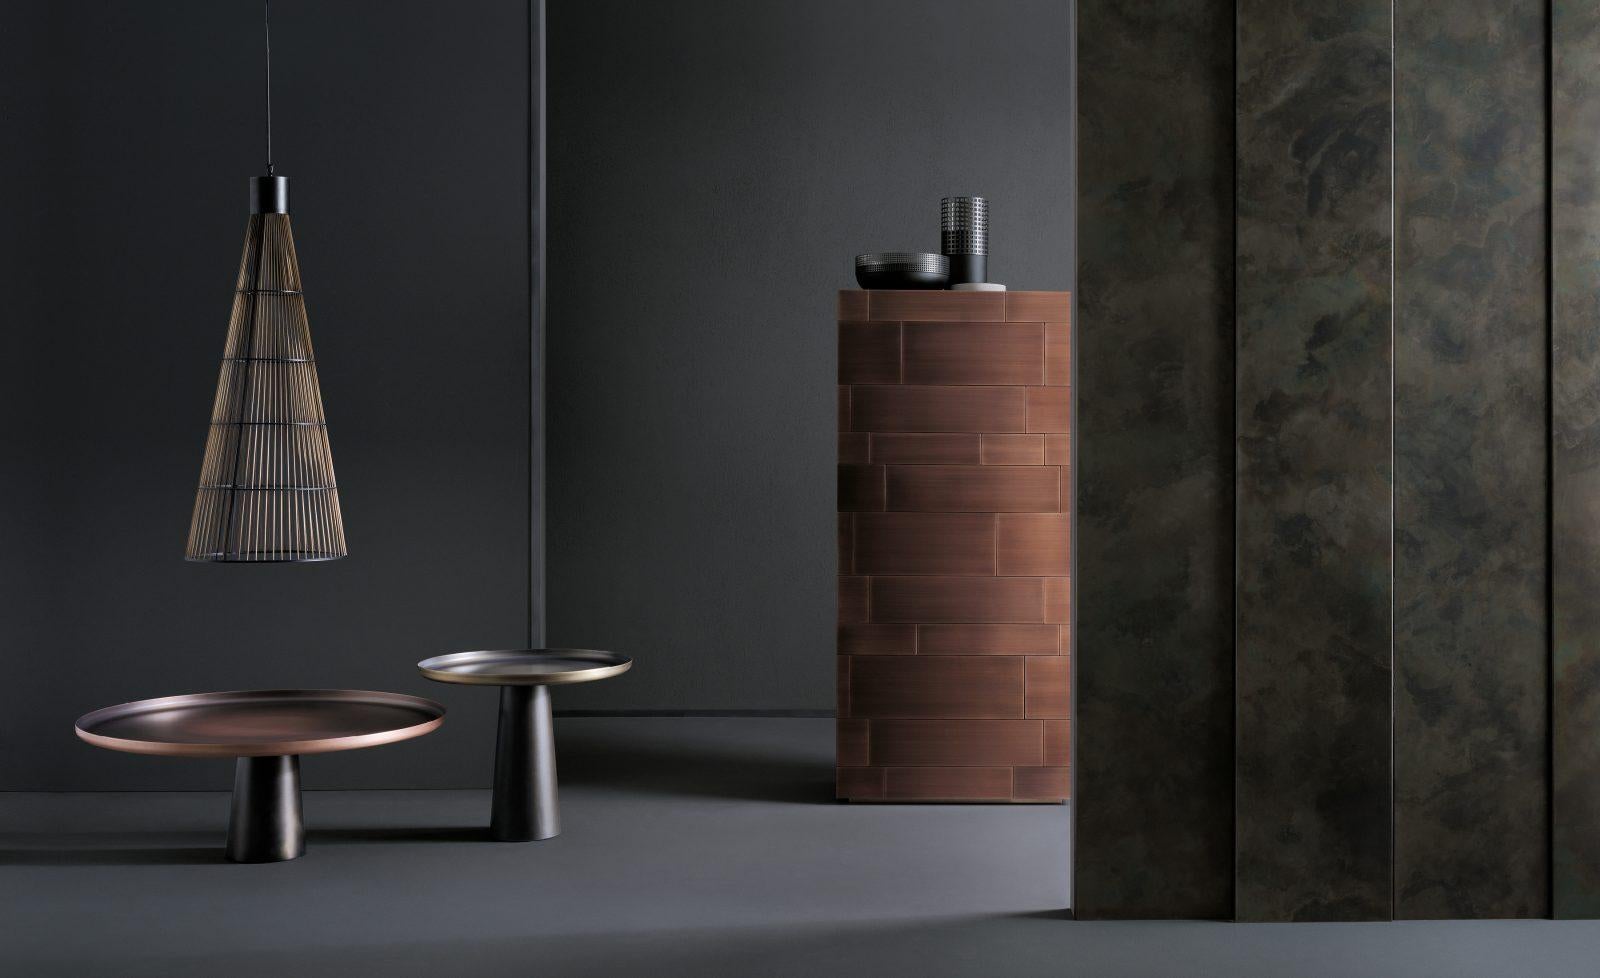 Designed by R&D DeCastelli

Celato is a reference to what is concealed to keep a memory intact; it’s an archetype in which beauty is revealed in stages. 
A monolithic appearance makes Celato a contemporary menhir; like a legend that tells of